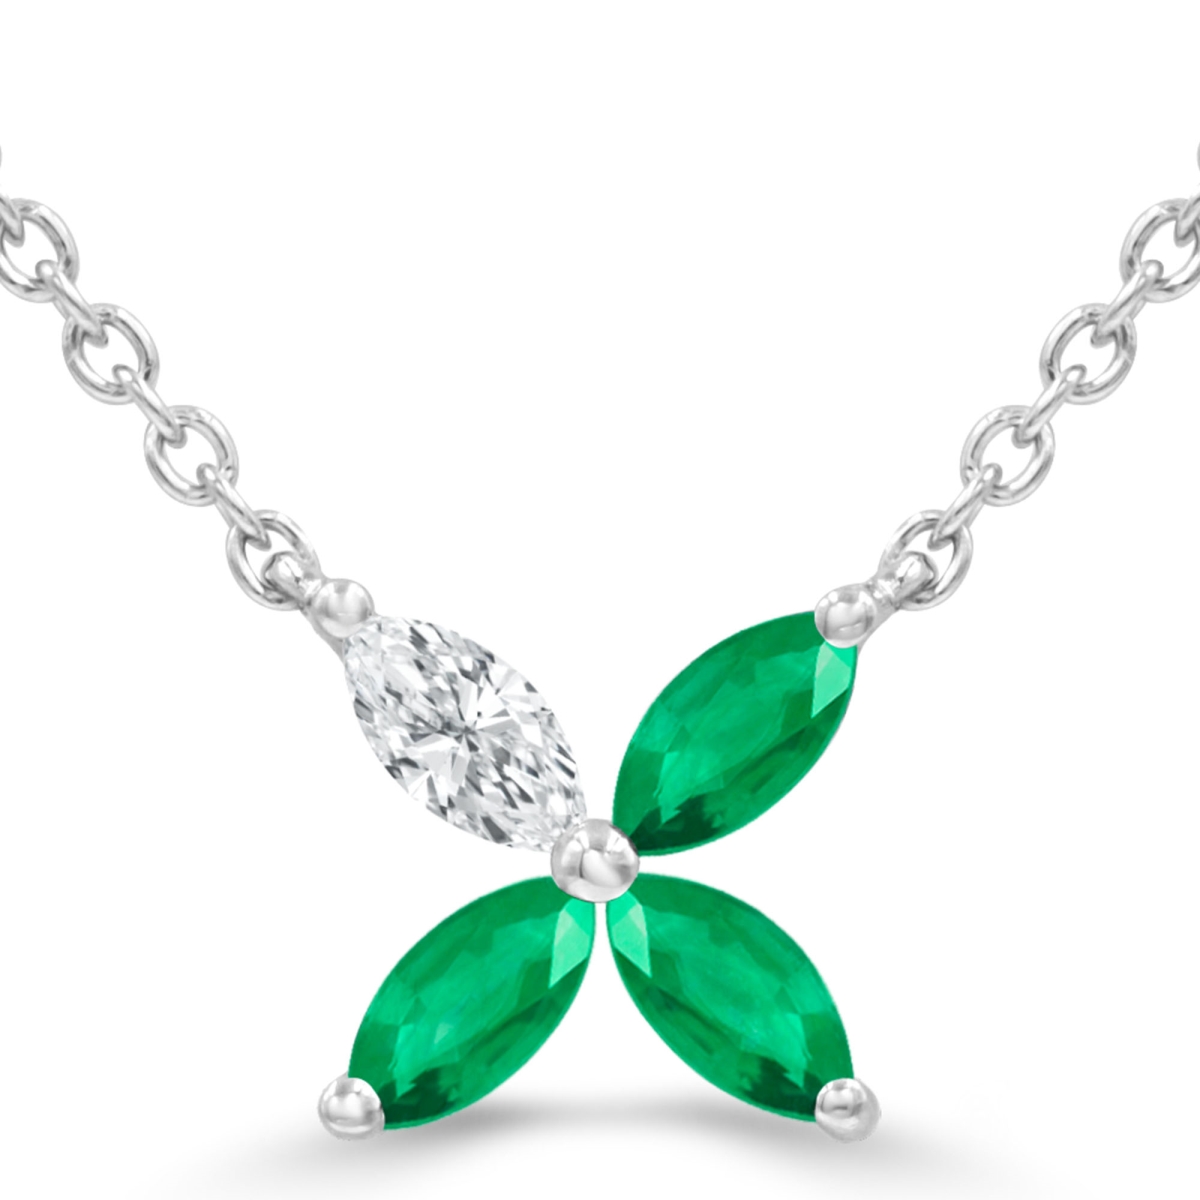 Picture of Majesty Diamonds MDR220180 0.33 CTW Marquise Green Emerald Floral Necklace in 14K White Gold